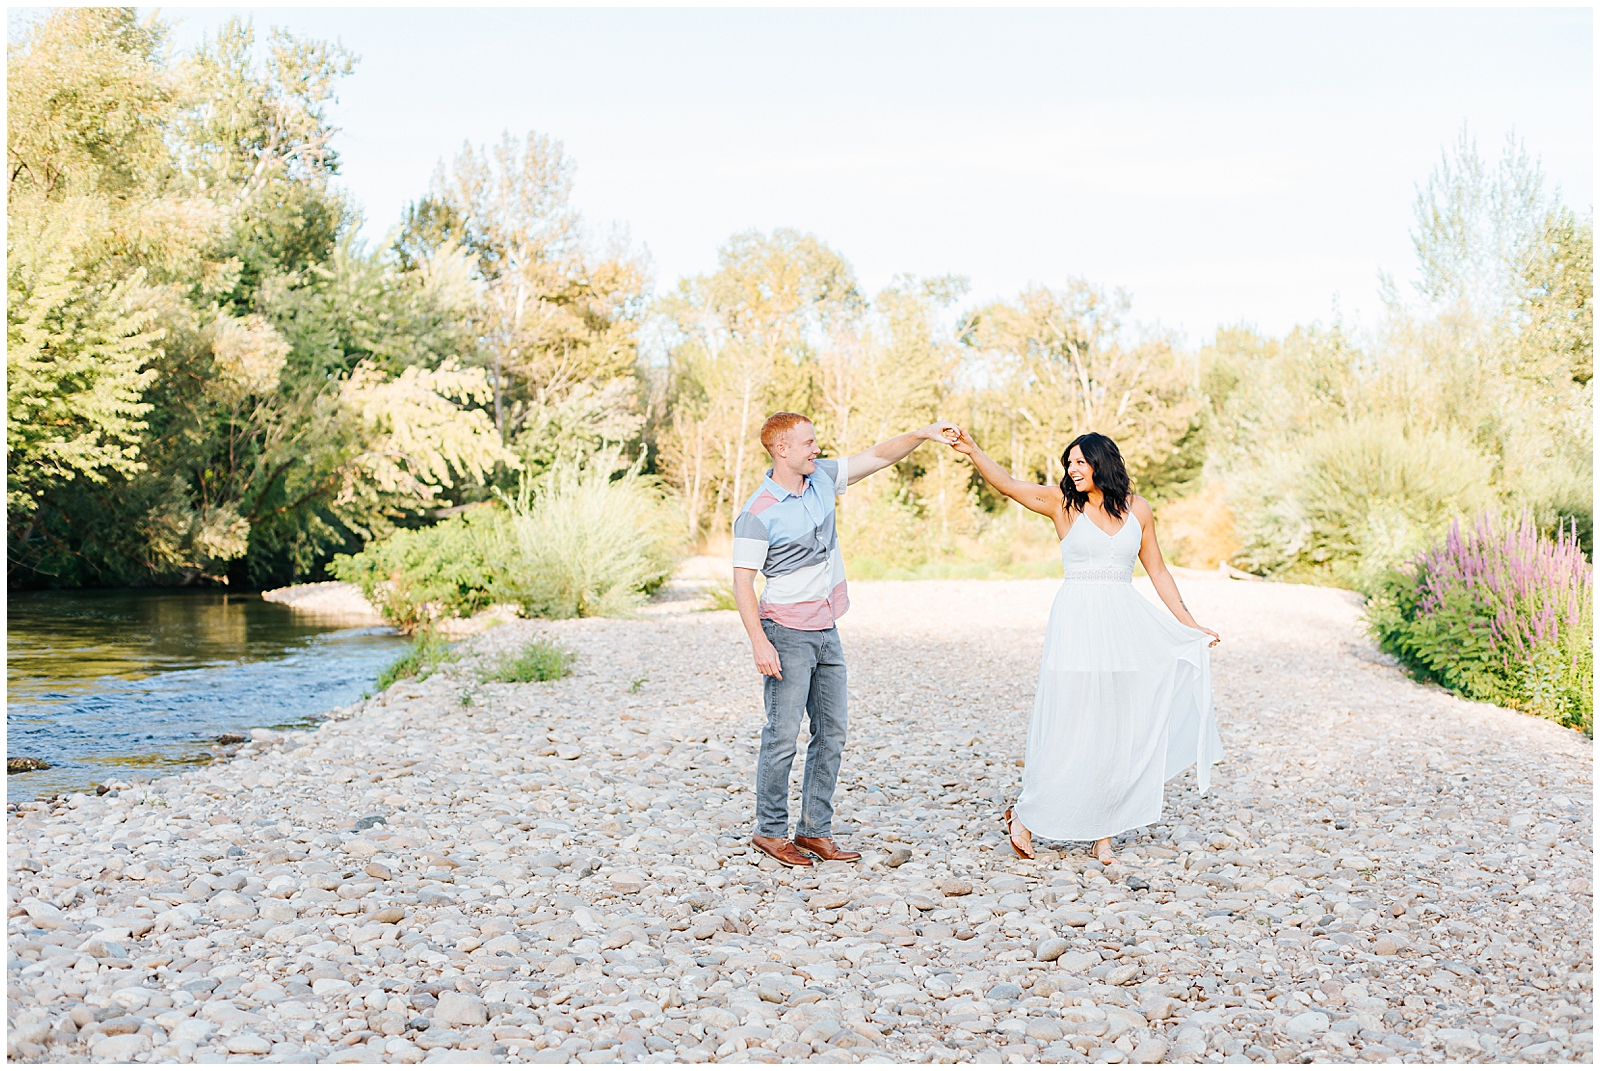 Dancing by the boise River